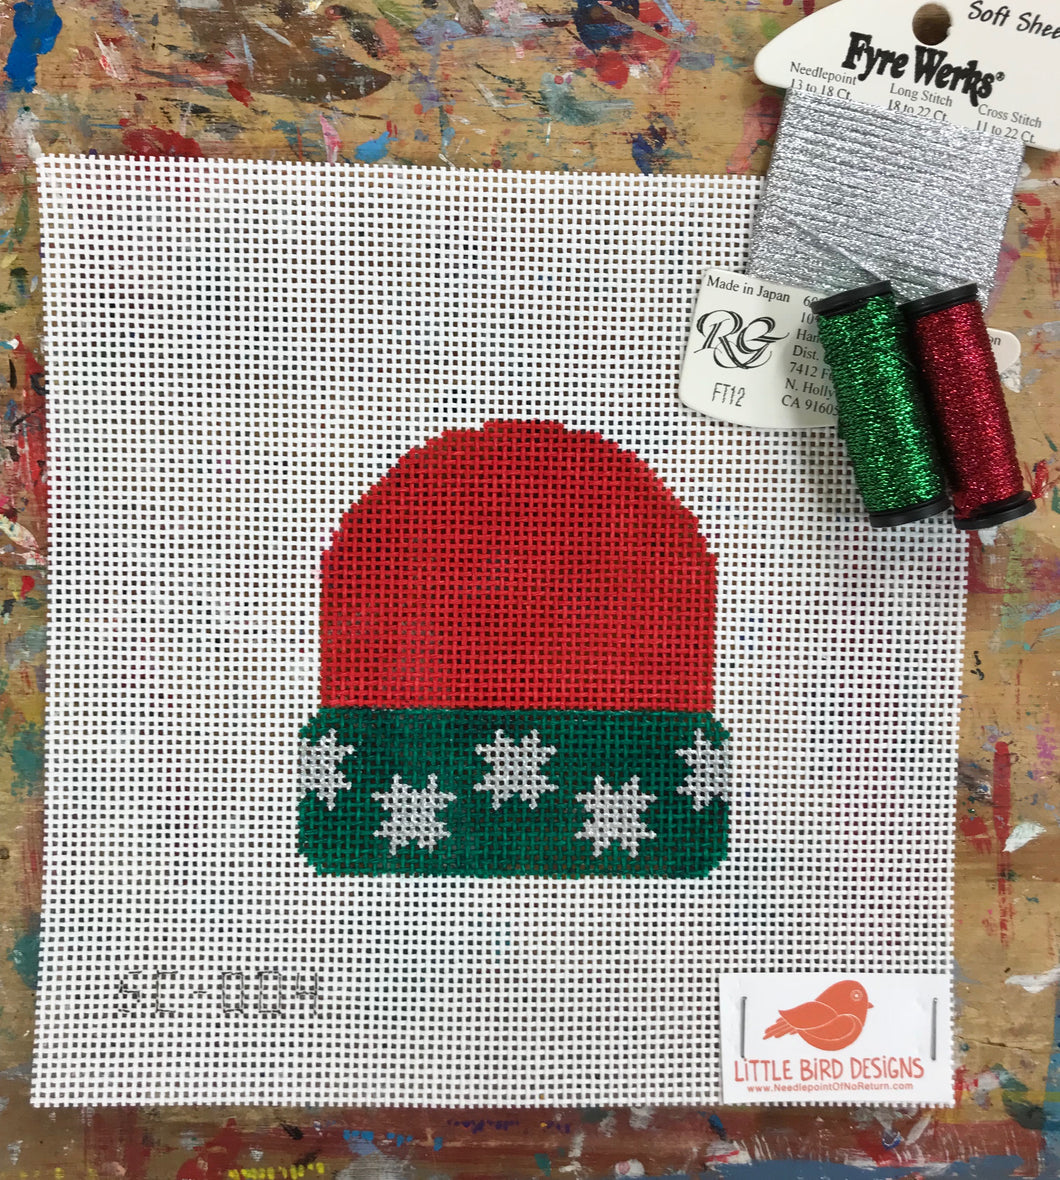 SC-004 Red with silver stars stocking cap